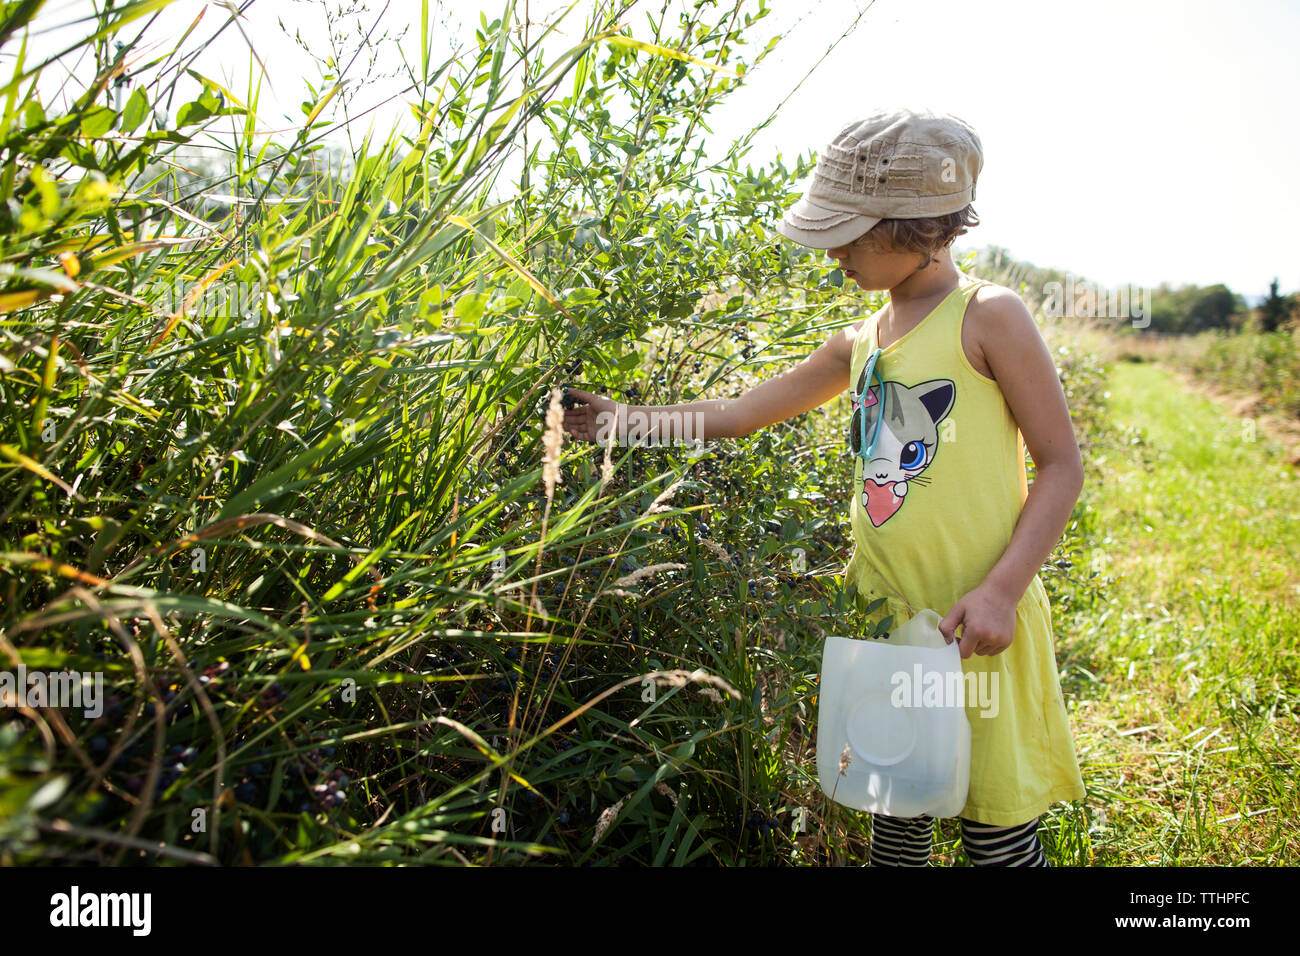 Girl plucking fruits while standing in field Stock Photo